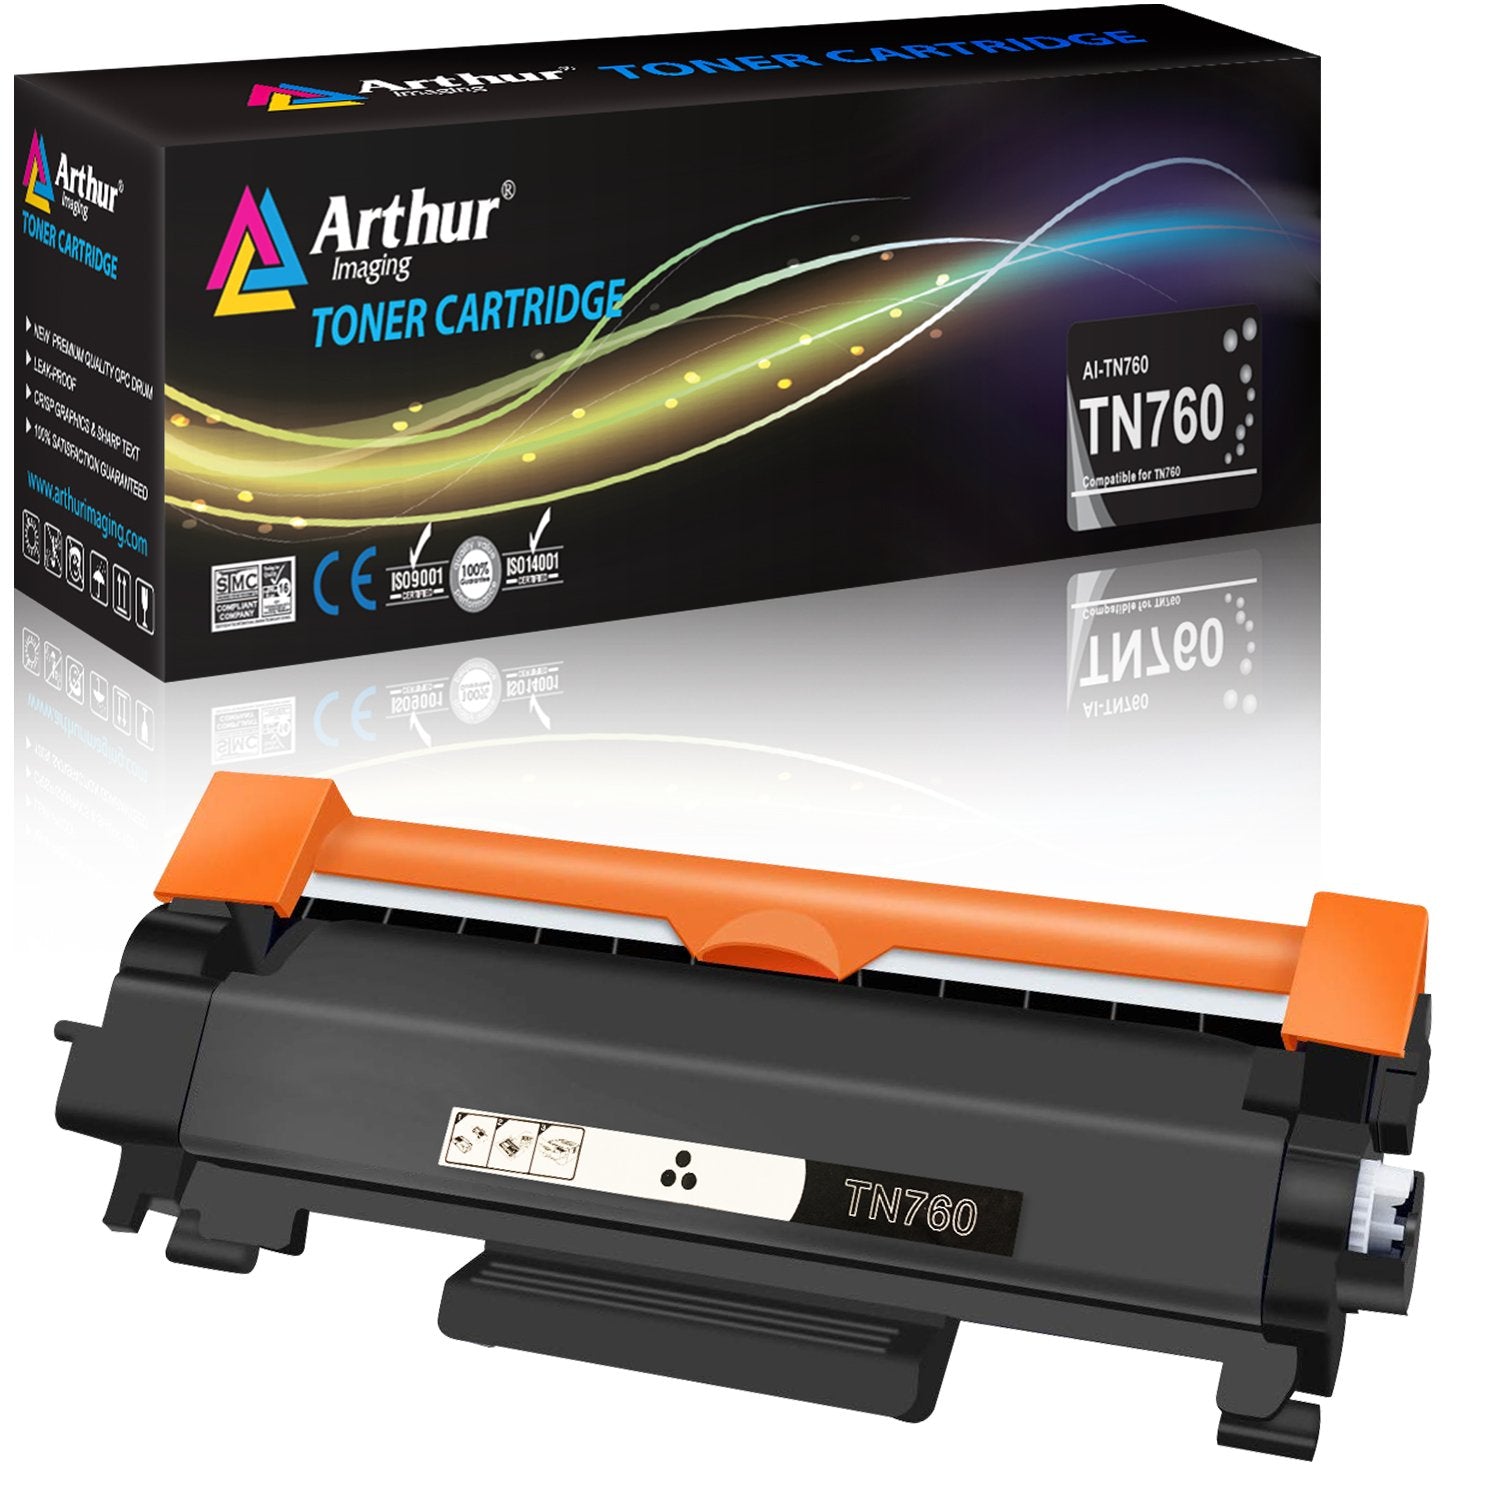 Compatible Brother TN247 Toner Cartridge – Yorkshire Inks